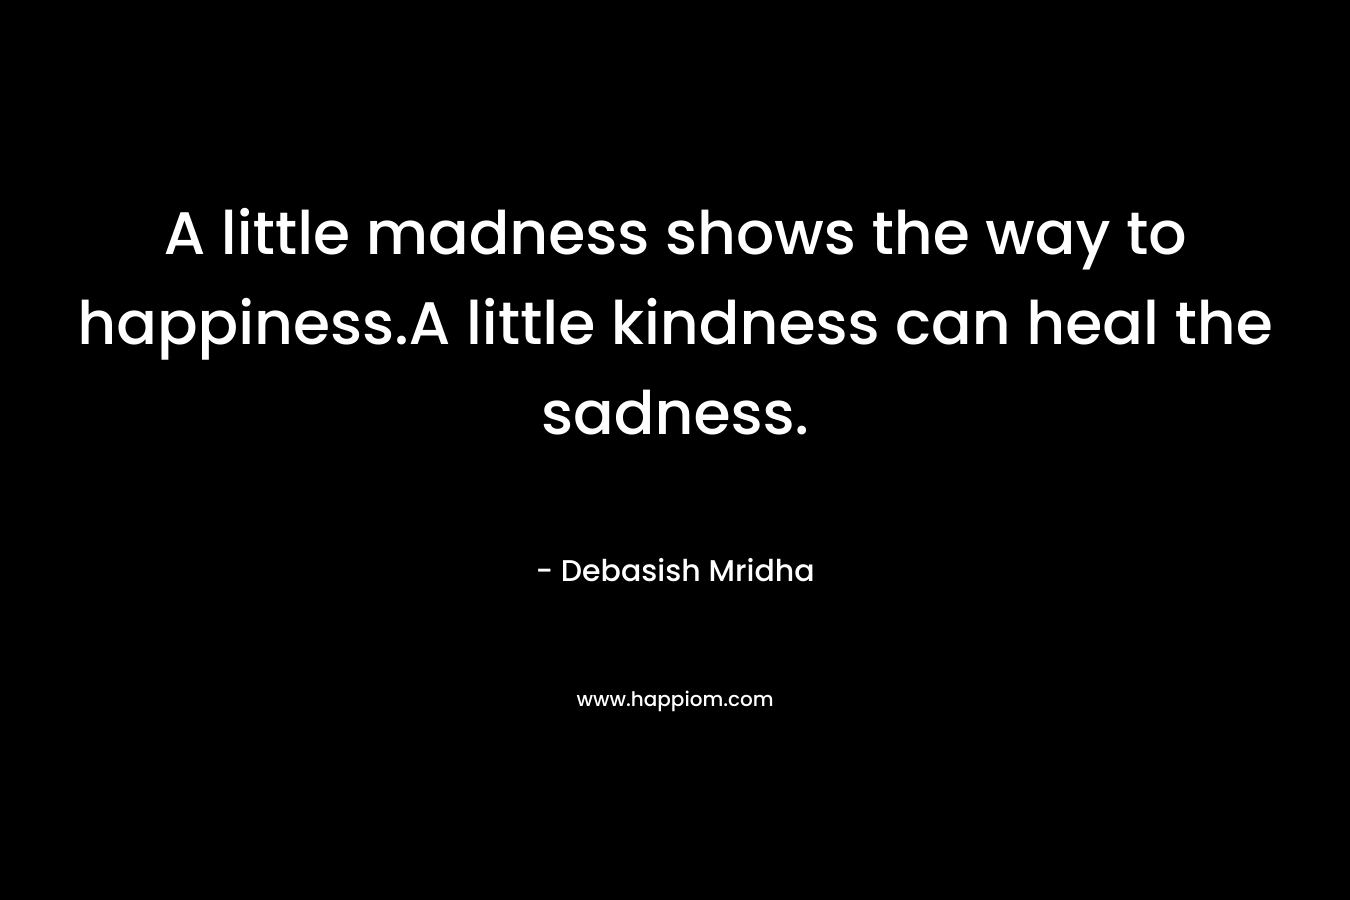 A little madness shows the way to happiness.A little kindness can heal the sadness.